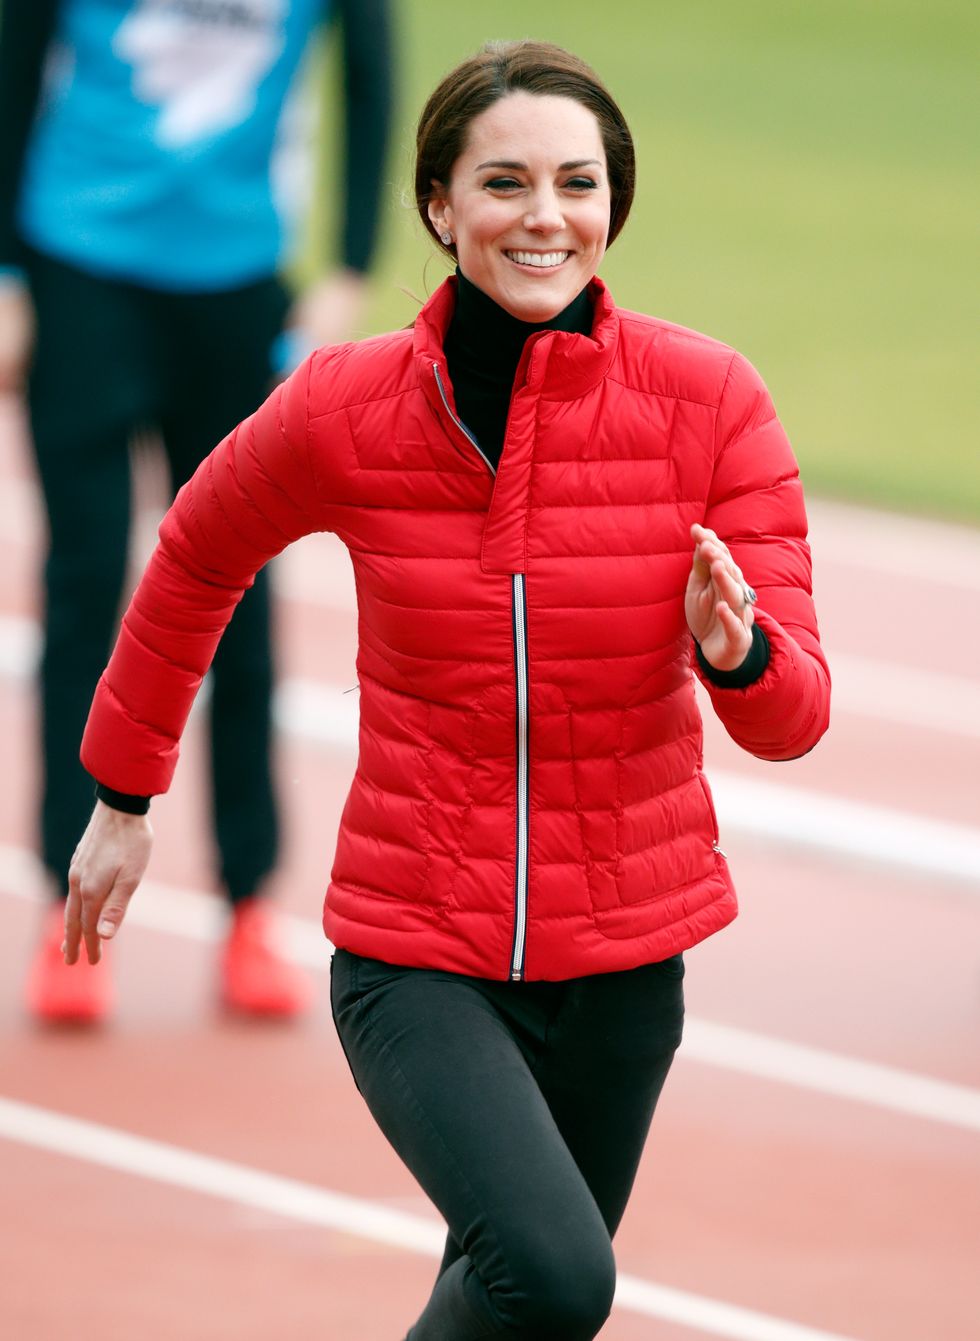 LONDON, UNITED KINGDOM - FEBRUARY 05: (EMBARGOED FOR PUBLICATION IN UK NEWSPAPERS UNTIL 48 HOURS AFTER CREATE DATE AND TIME) Catherine, Duchess of Cambridge takes part in a running race against Prince William, Duke of Cambridge and Prince Harry as they join a Team Heads Together London Marathon Training Day at the Queen Elizabeth Olympic Park on February 5, 2017 in London, England. (Photo by Max Mumby/Indigo/Getty Images)